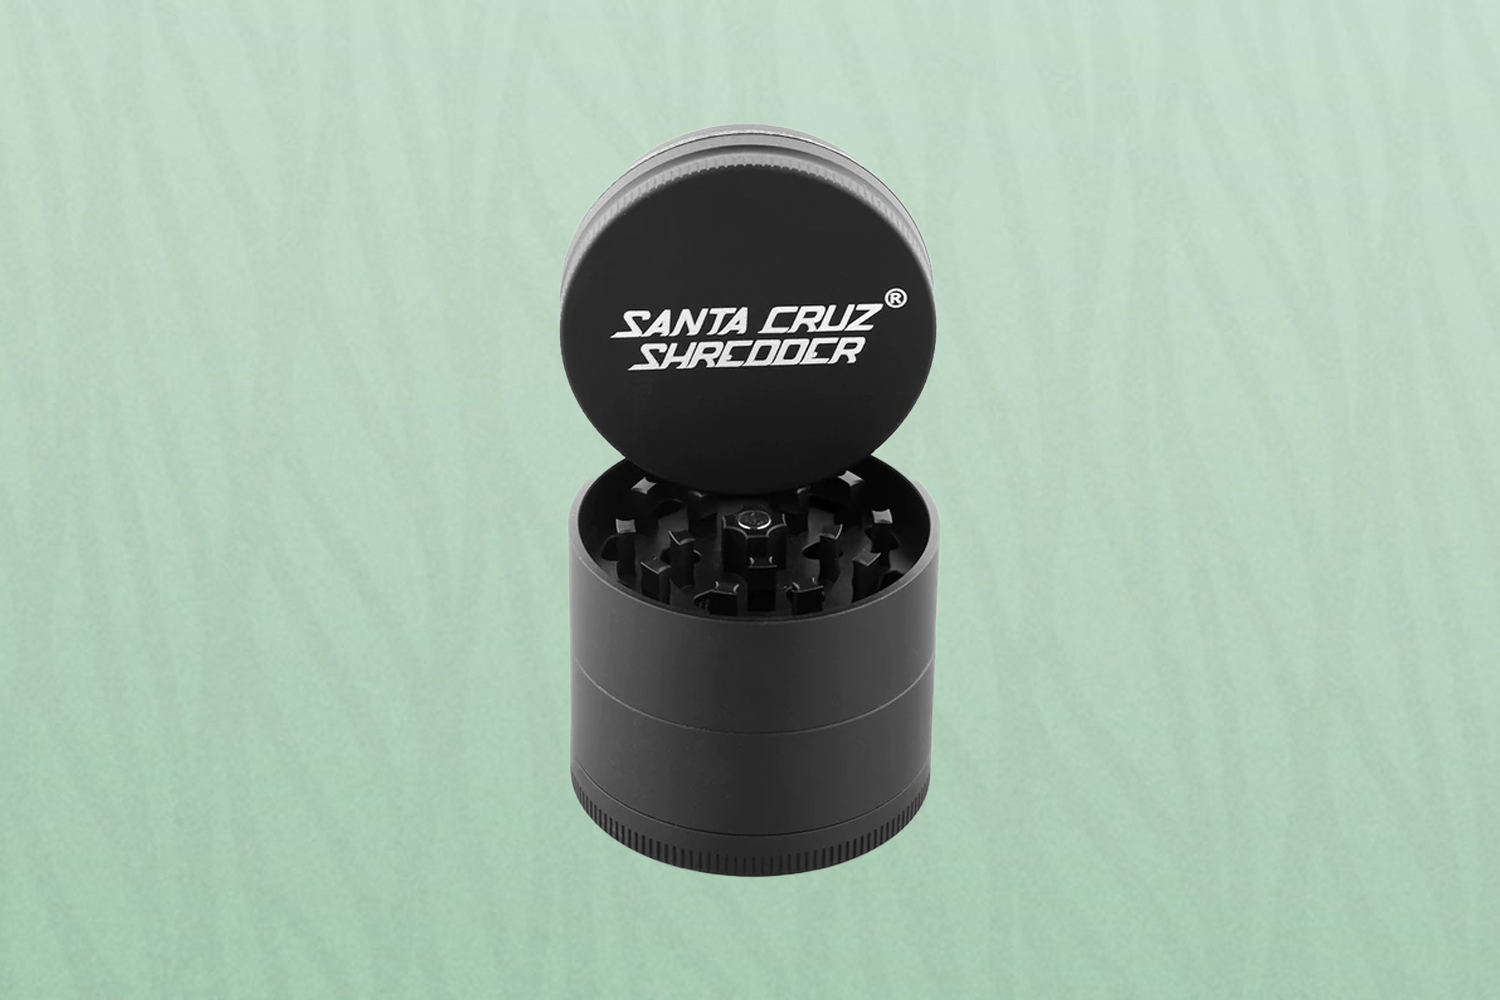 The Santa Cruz Shredder is the best weed grinder and is a great weed accessory for getting stoned in 2022